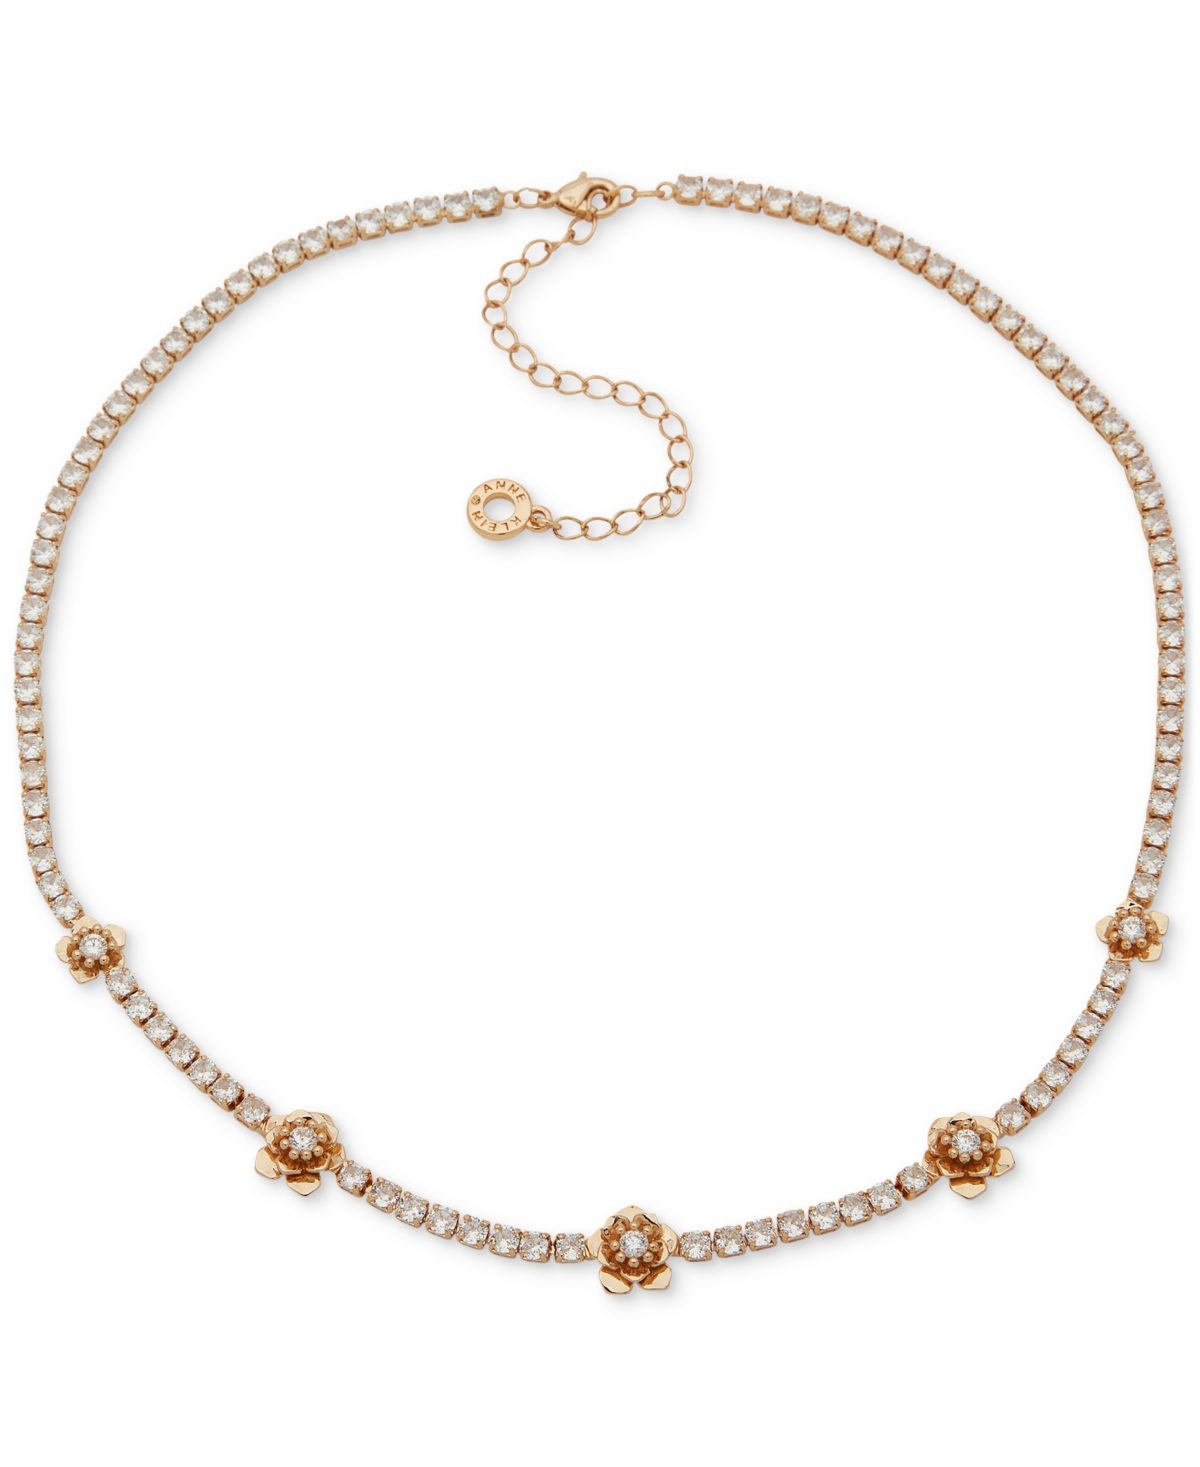 Gold-Tone Crystal Tennis Collar Necklace, 16" + 3" extender - Crystal